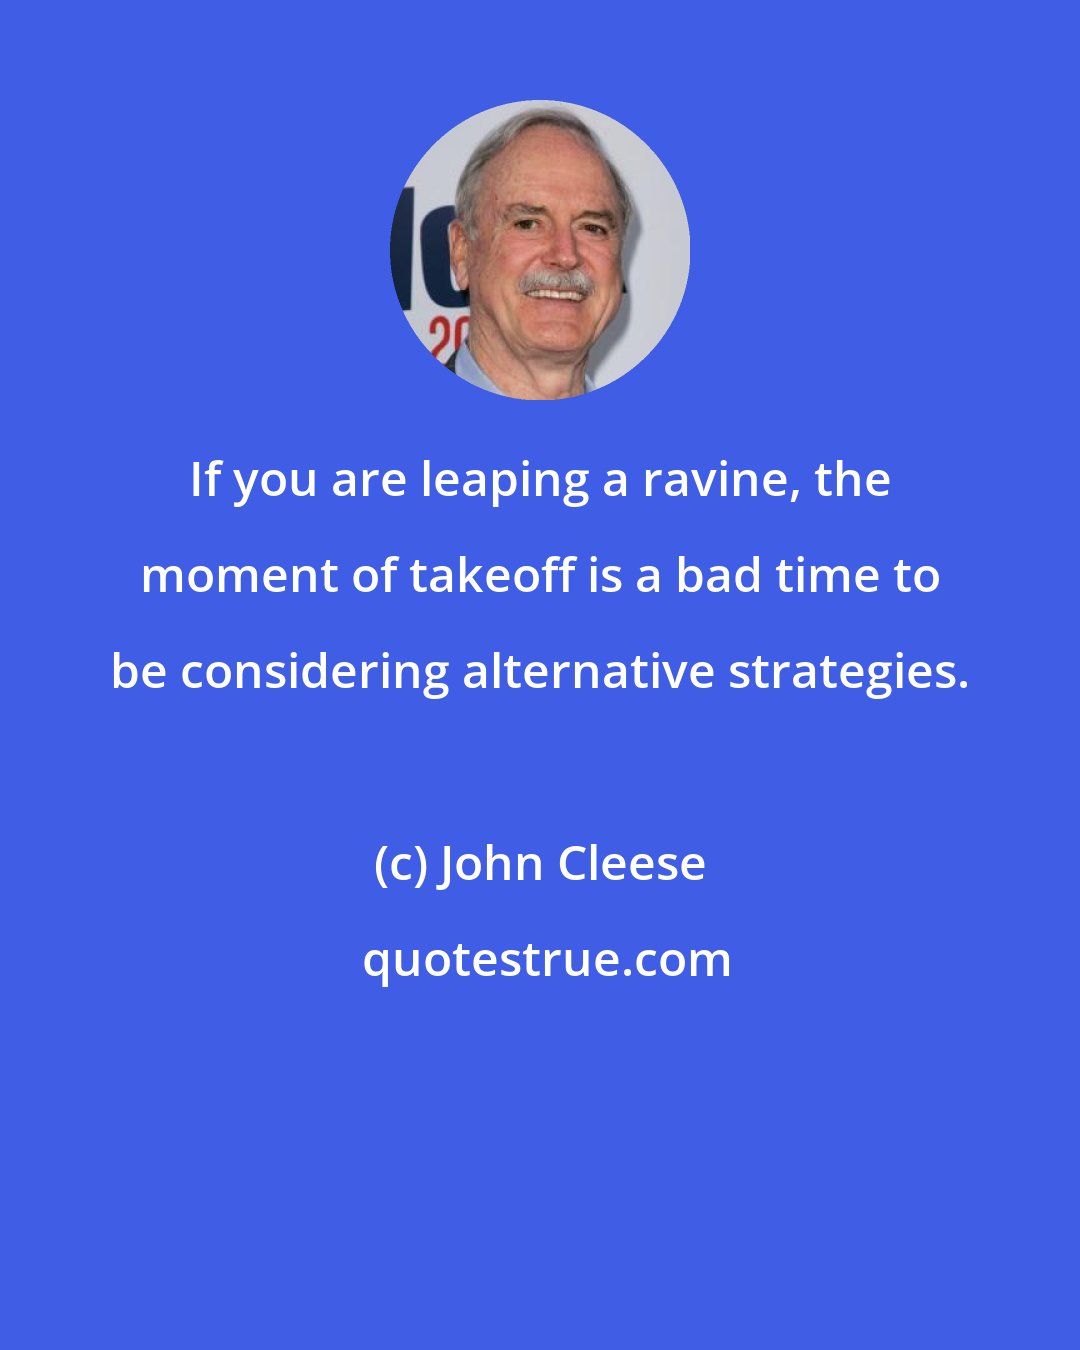 John Cleese: If you are leaping a ravine, the moment of takeoff is a bad time to be considering alternative strategies.